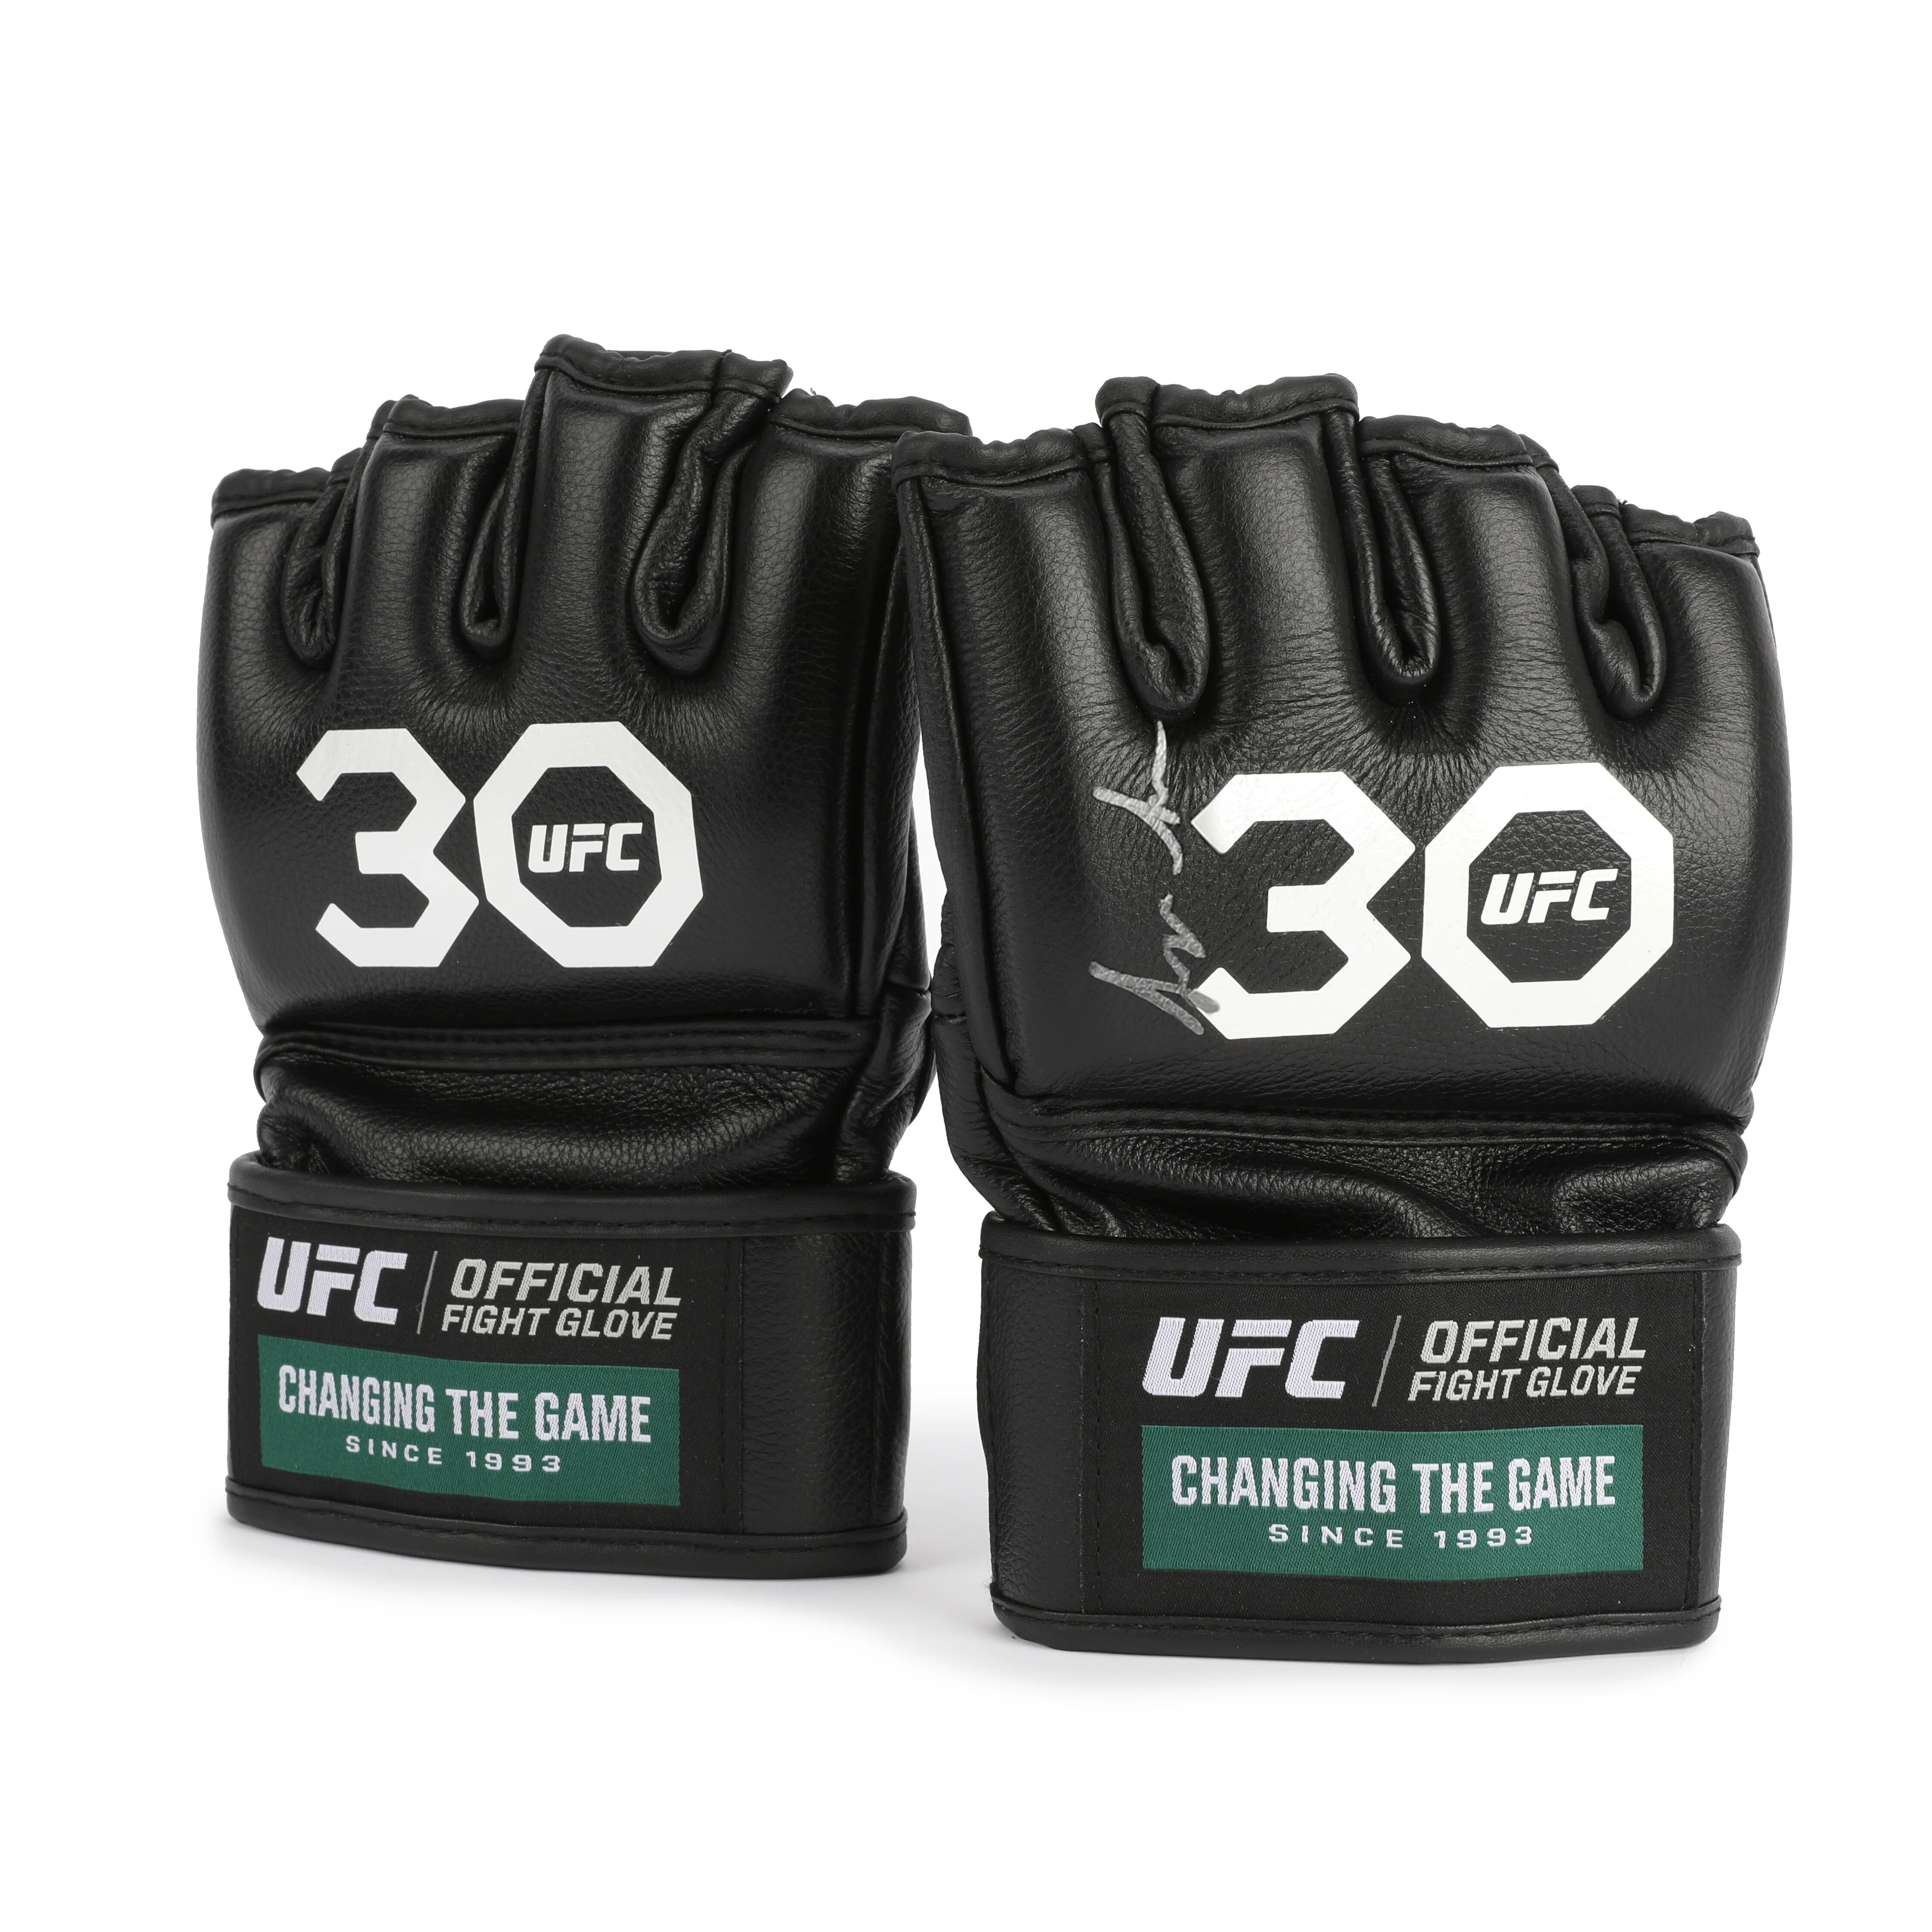 UFC Collectibles Sean O'Malley Signed Official UFC Gloves – 30th Anniversary Edition